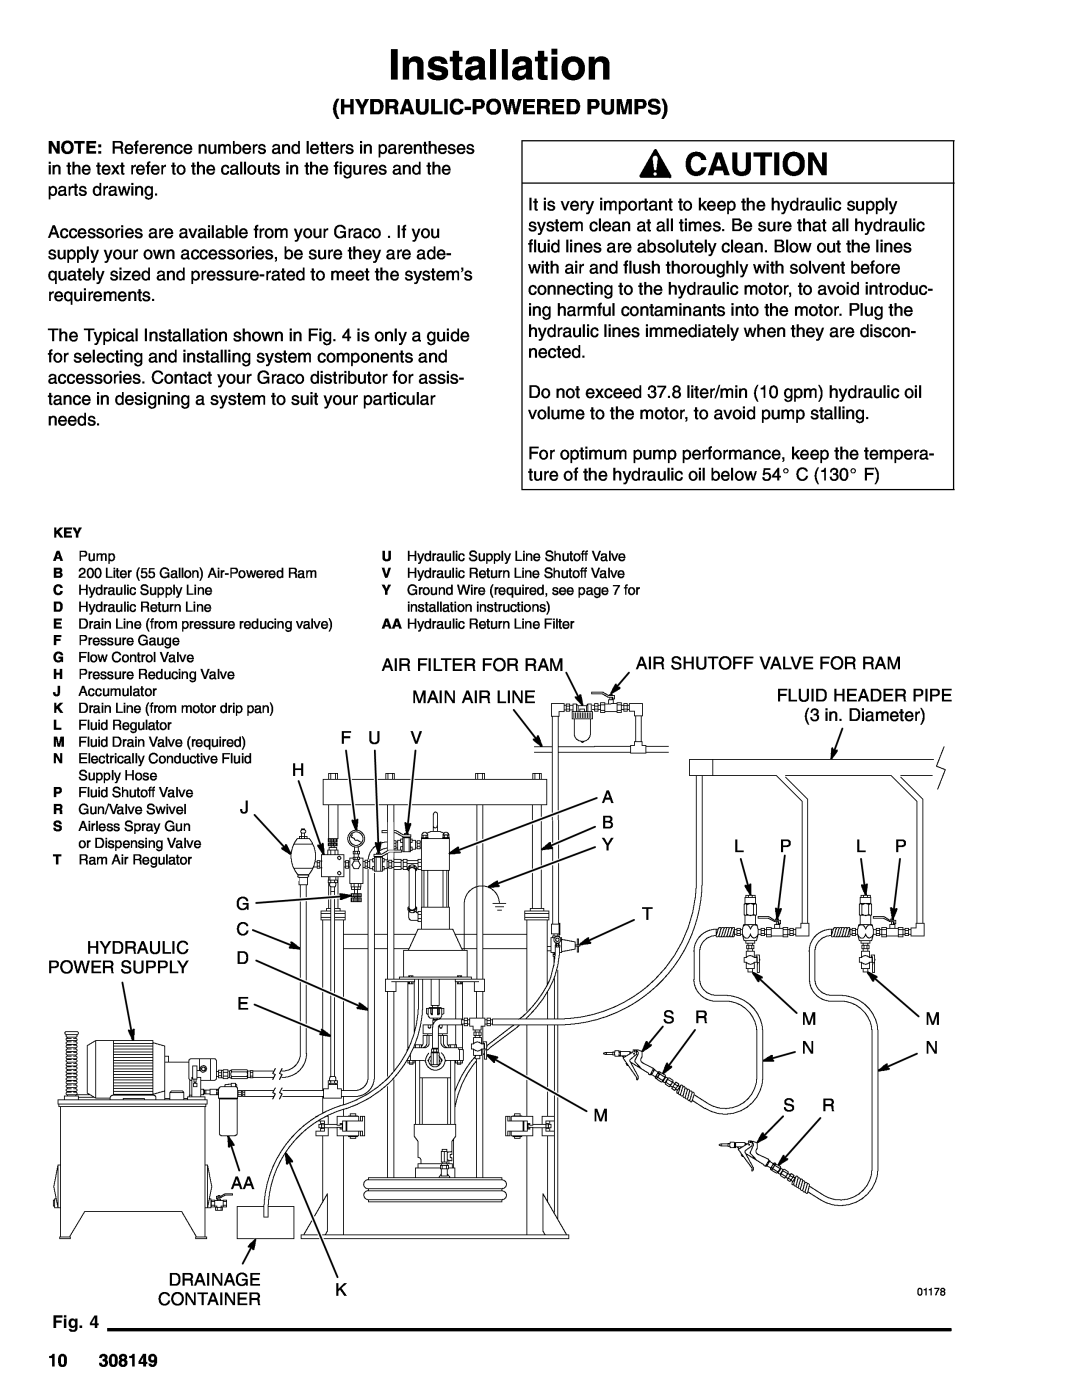 Graco 308149P important safety instructions Hydraulic-Poweredpumps, Installation 